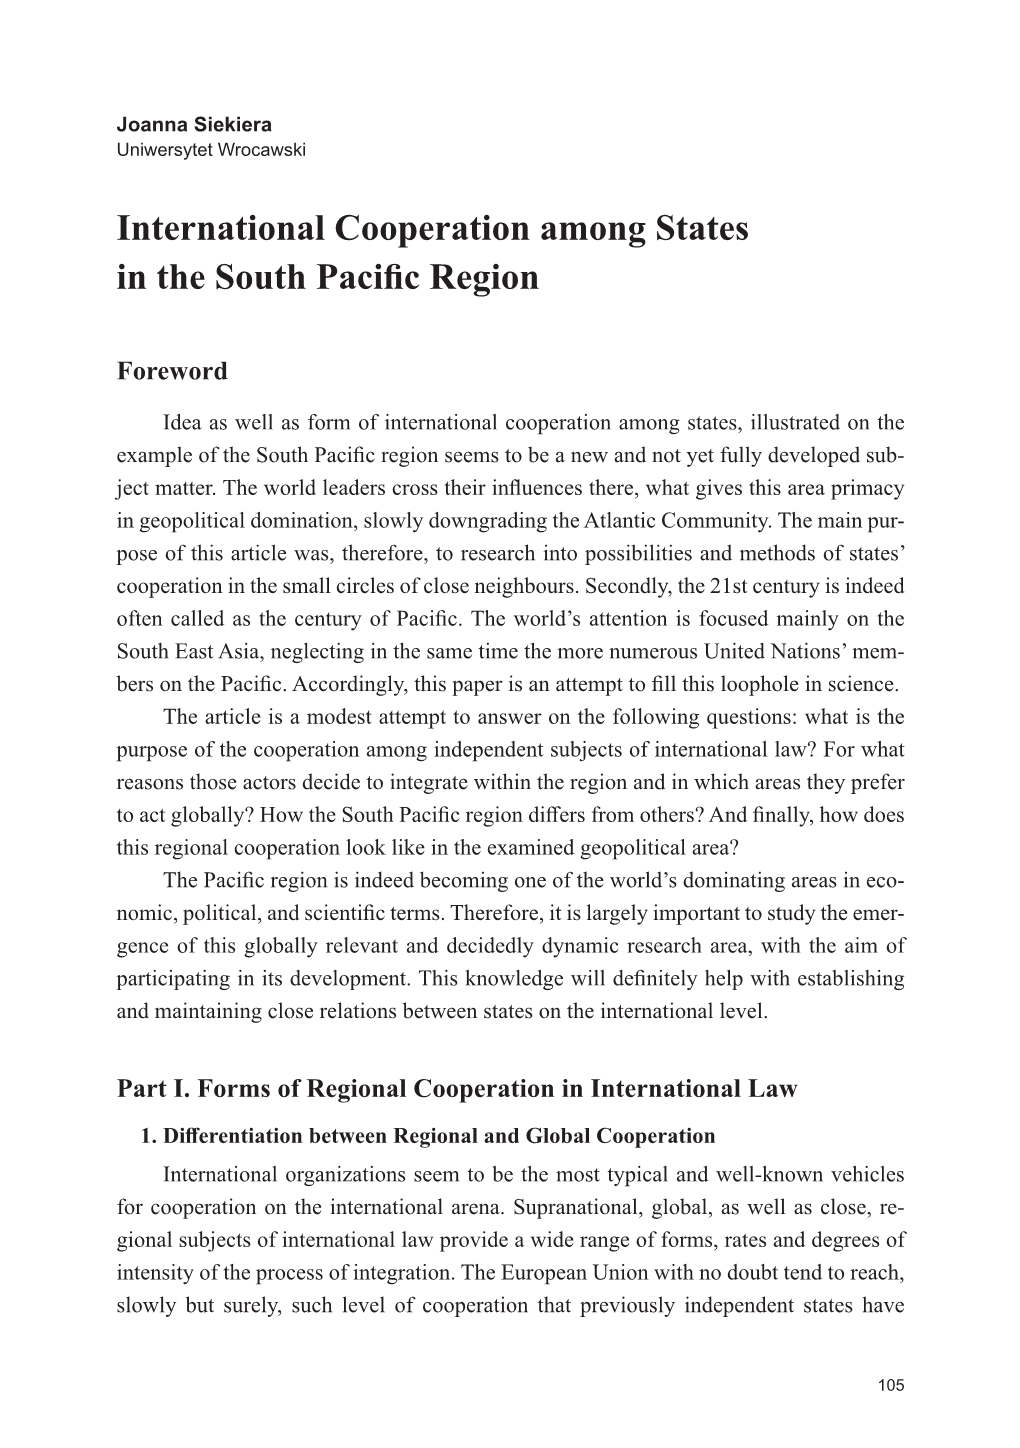 International Cooperation Among States in the South Pacific Region